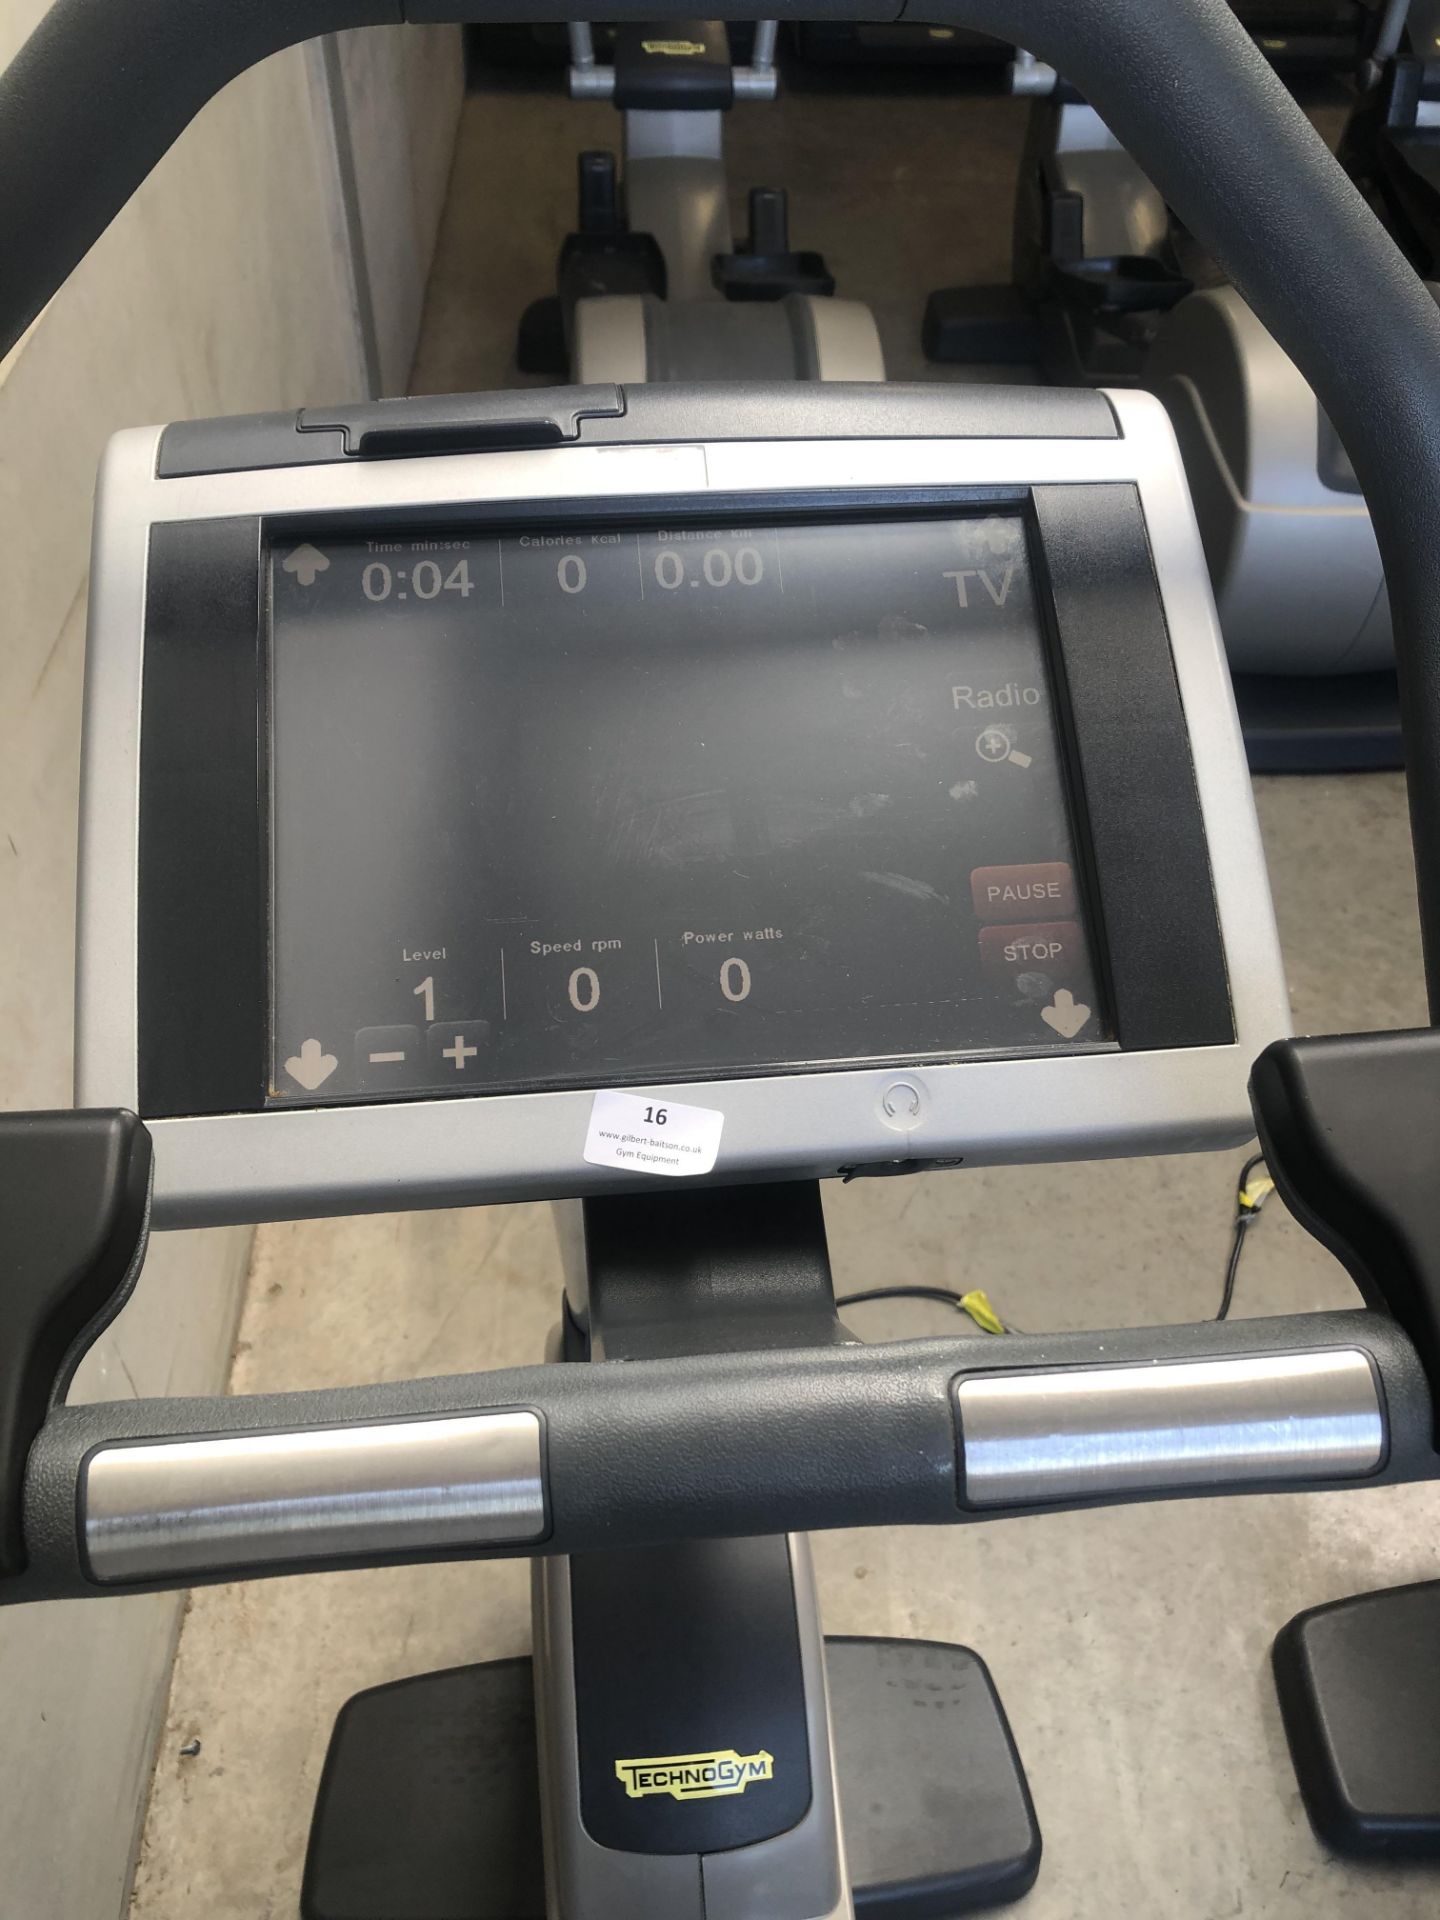 *Technogym 700 Series Upright Exercise Cycle with Touchscreen TV - Image 2 of 2